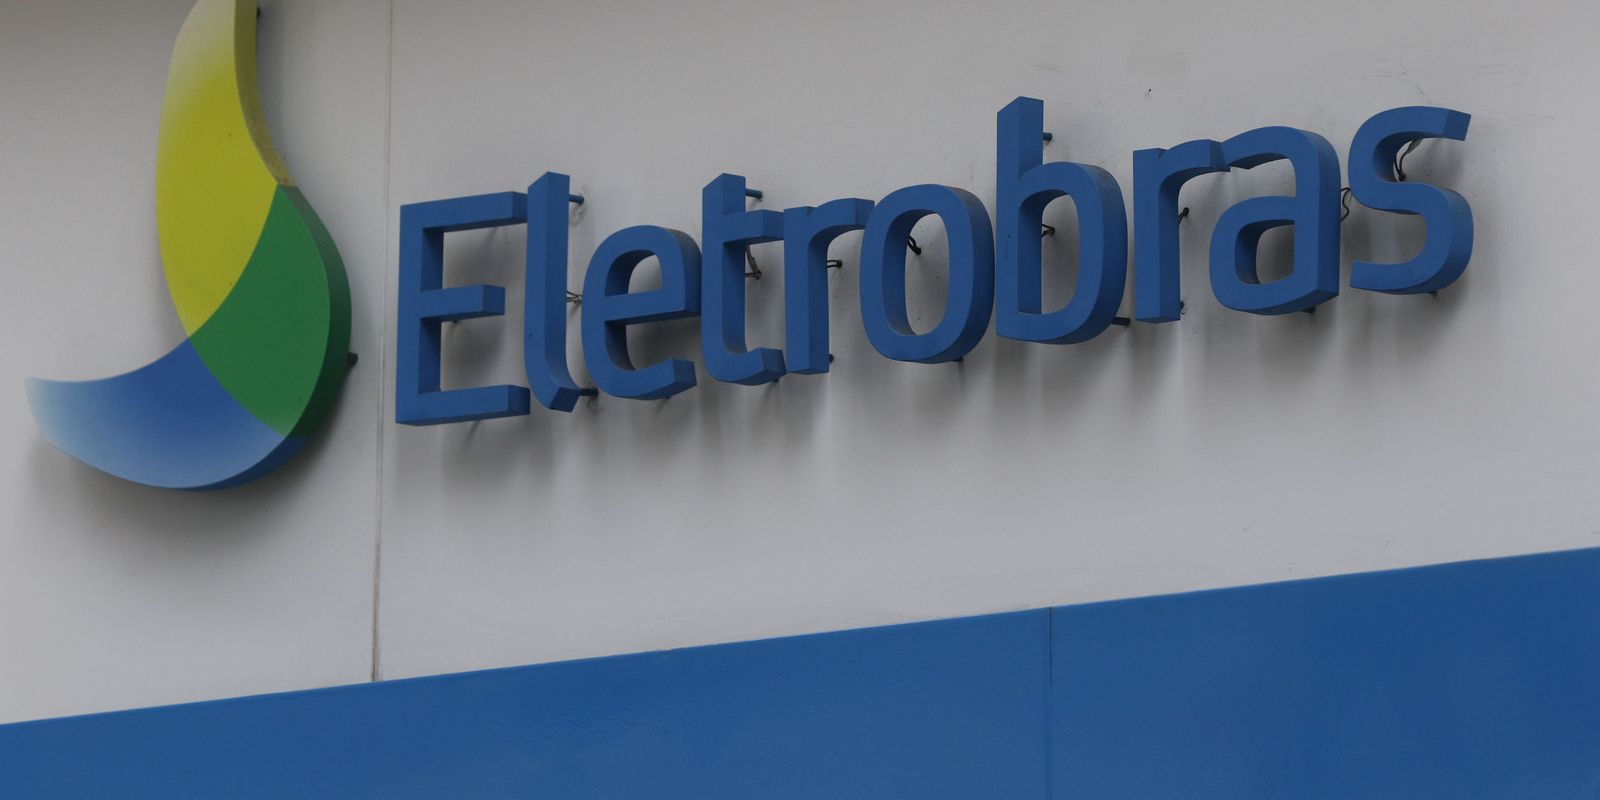 Without competition, Eletrobras auctions a property in Rio for R$ 75 million